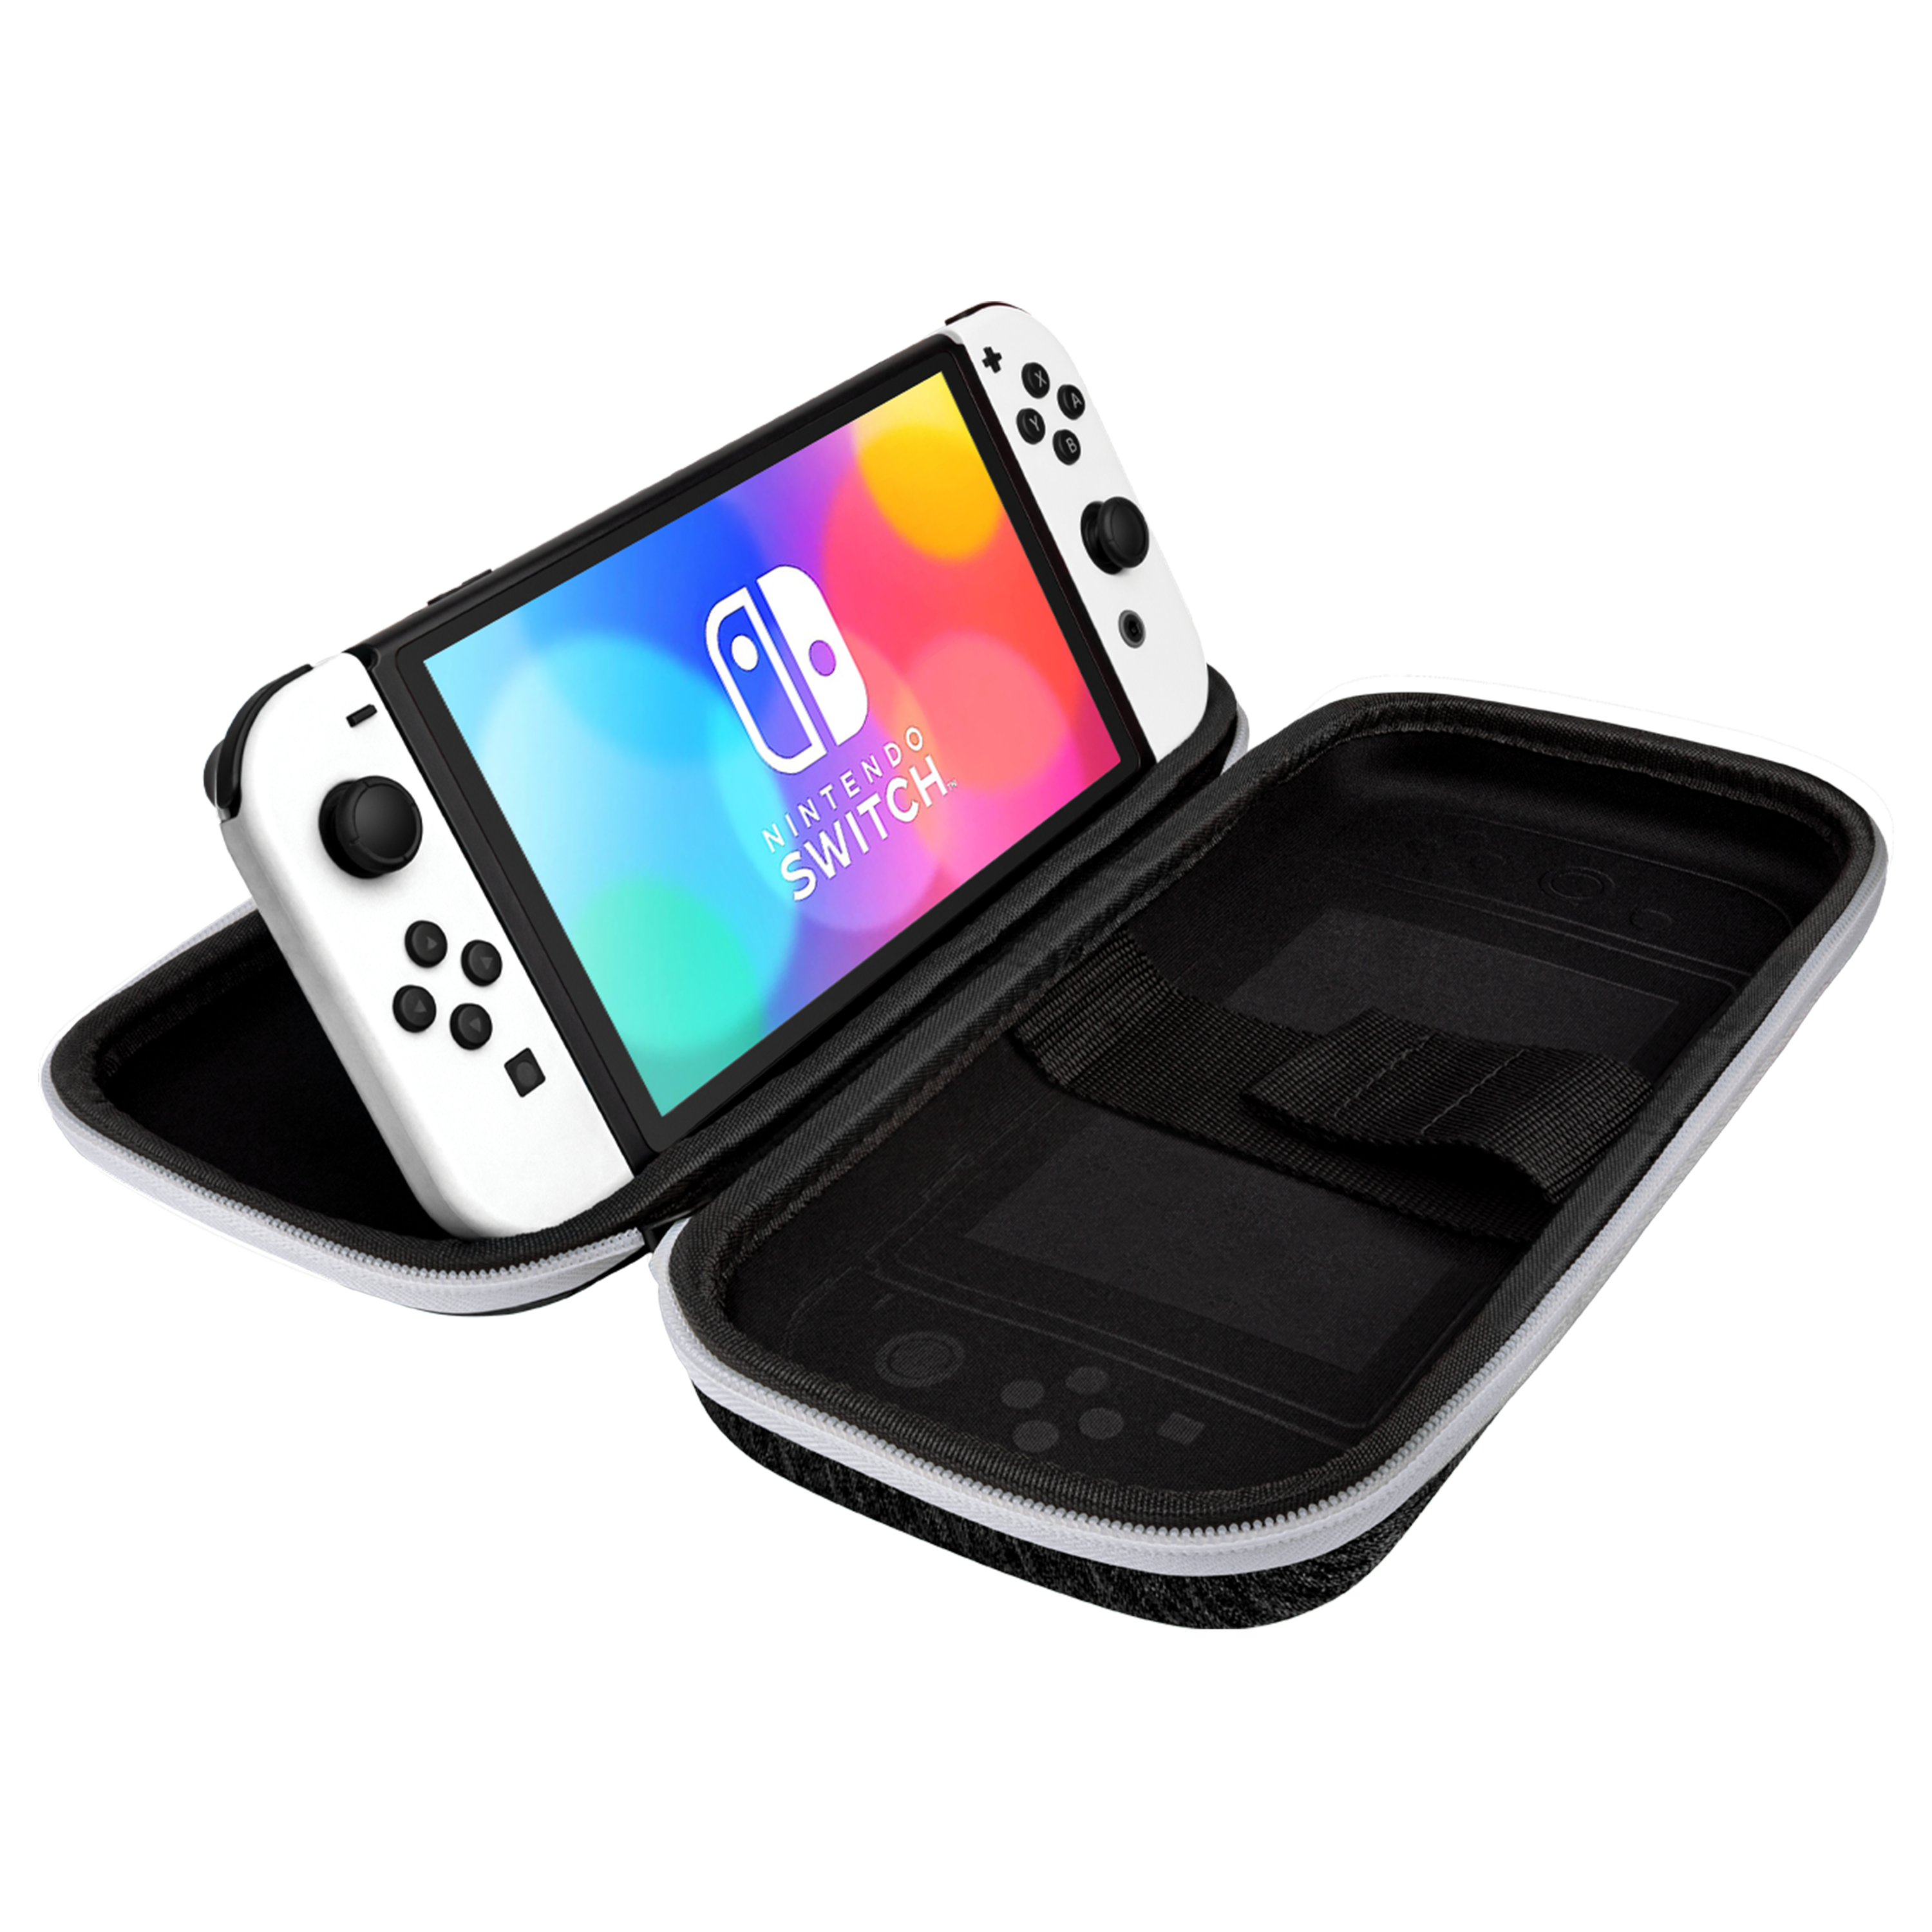 Deluxe Travel Case - Elite Edition for Switch